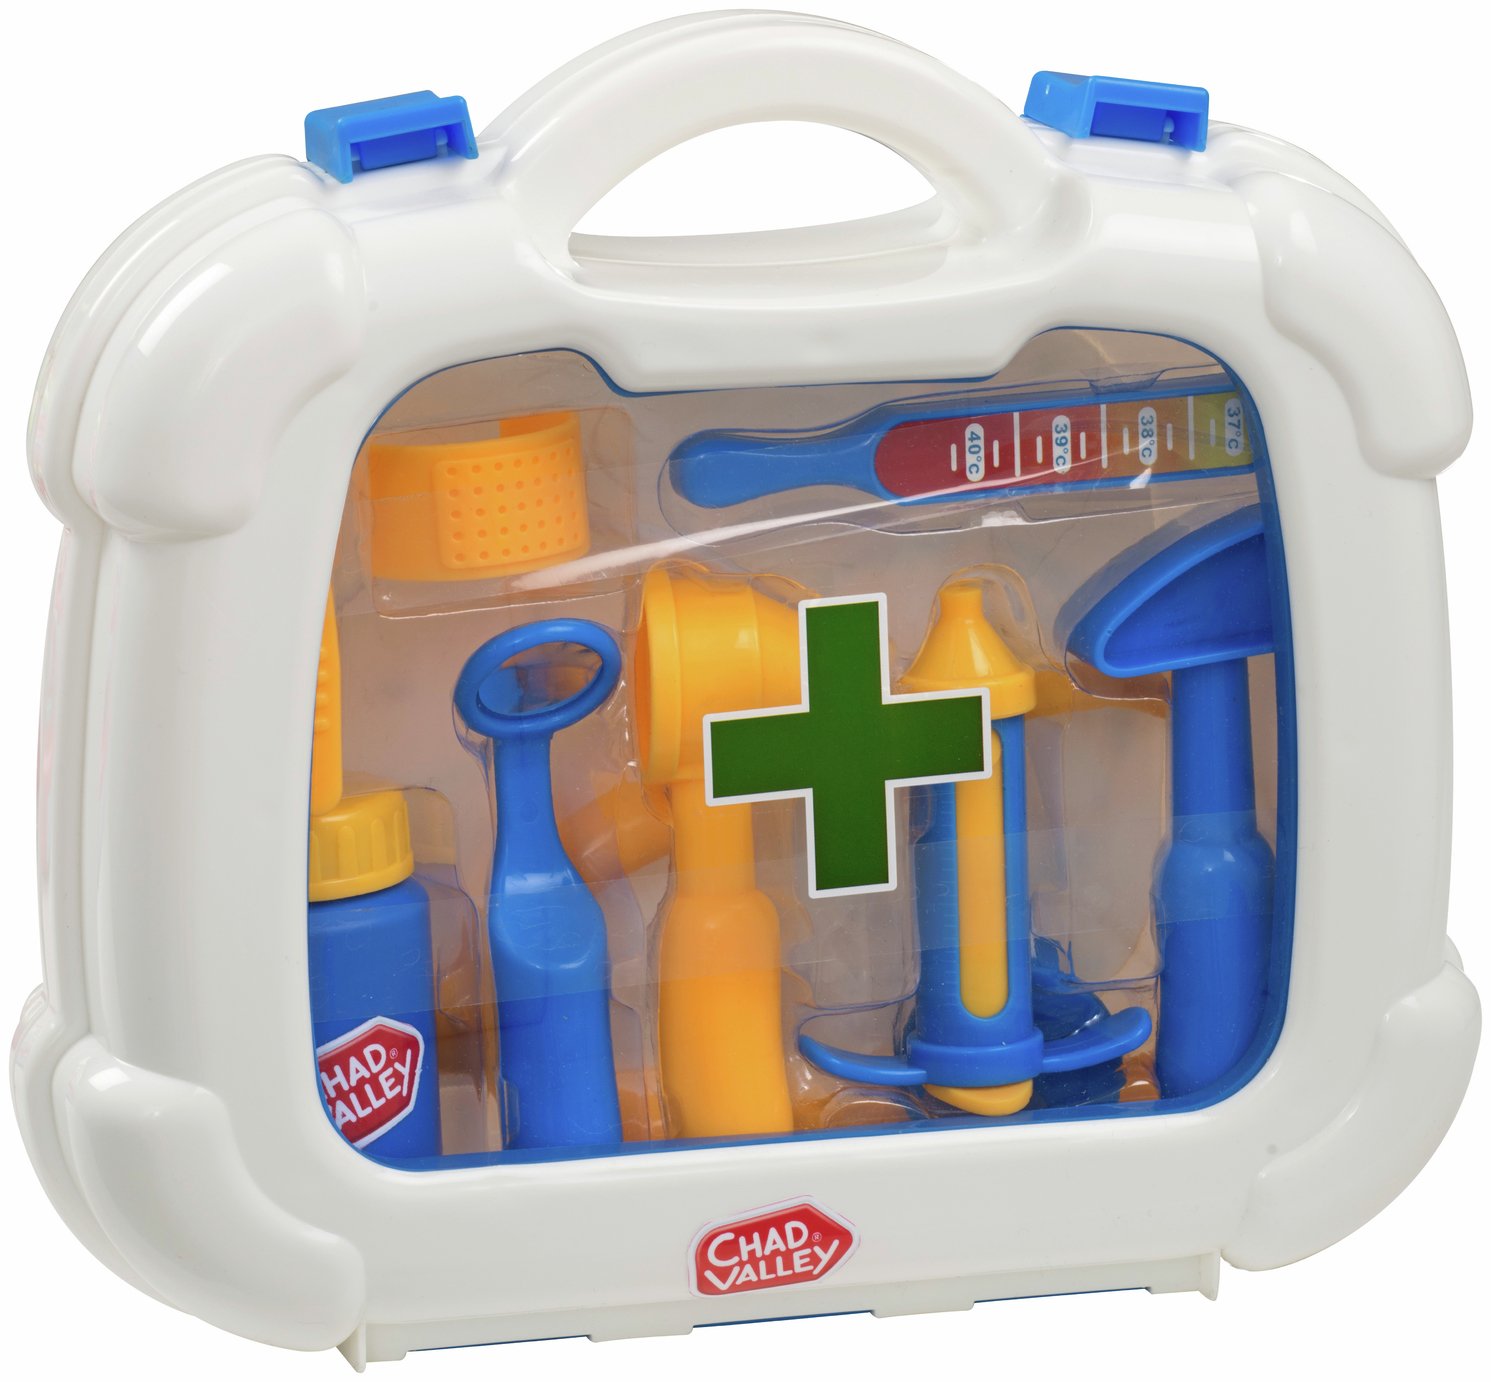 Chad Valley Doctors Set Great for Role Play Fun Kids 5 Stars for sale online 